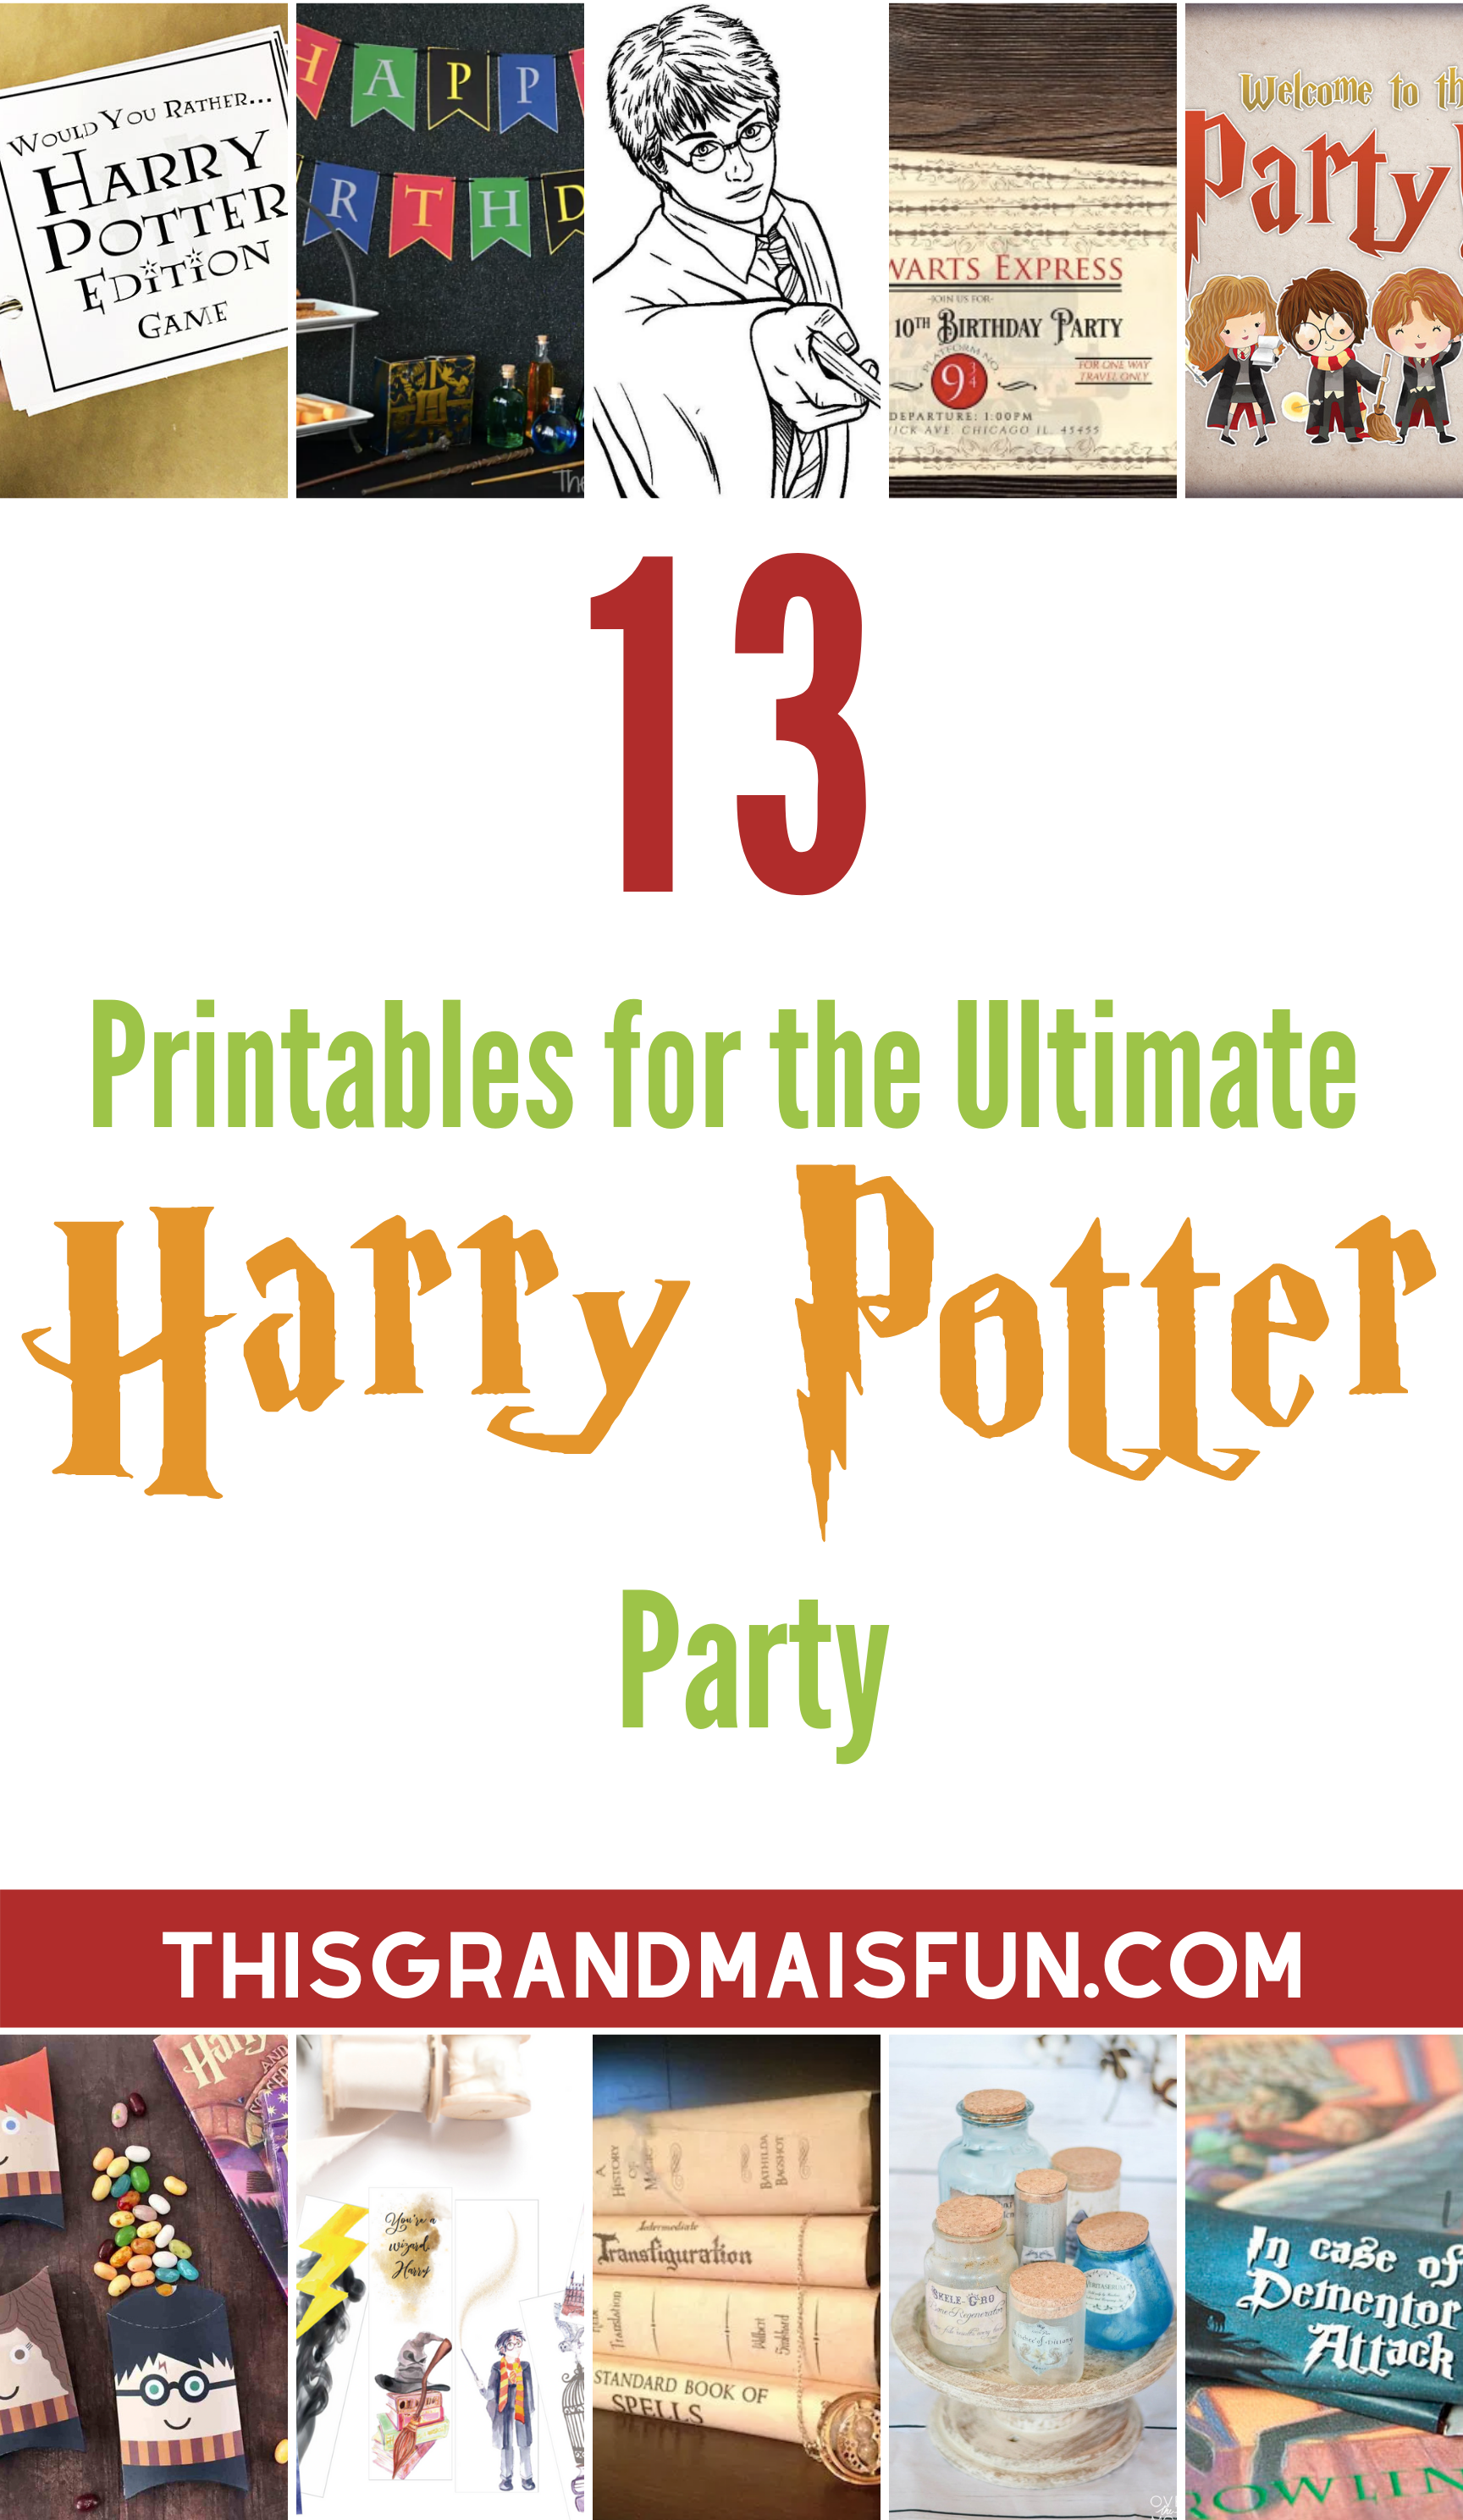 This is how we do a 'Harry Potter Party Hunt